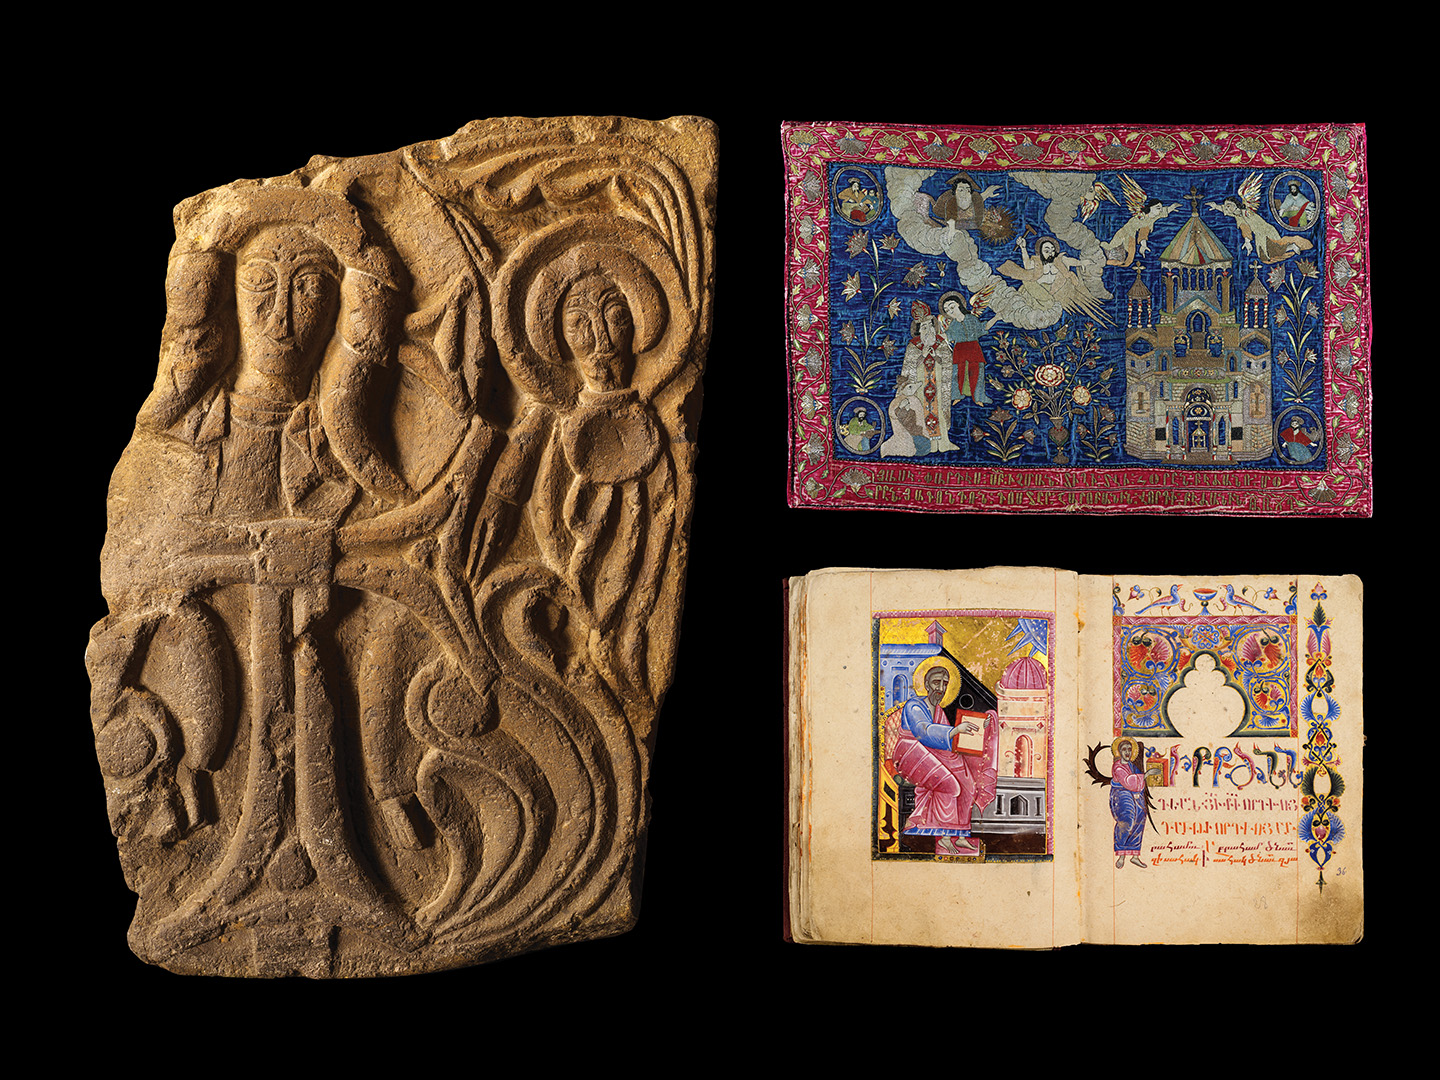 A sample of Armenian relief sculptures, textiles, manuscripts and jewelry that will be displayed at the Metropolitan Museum of Art’s Armenia! exhibit.